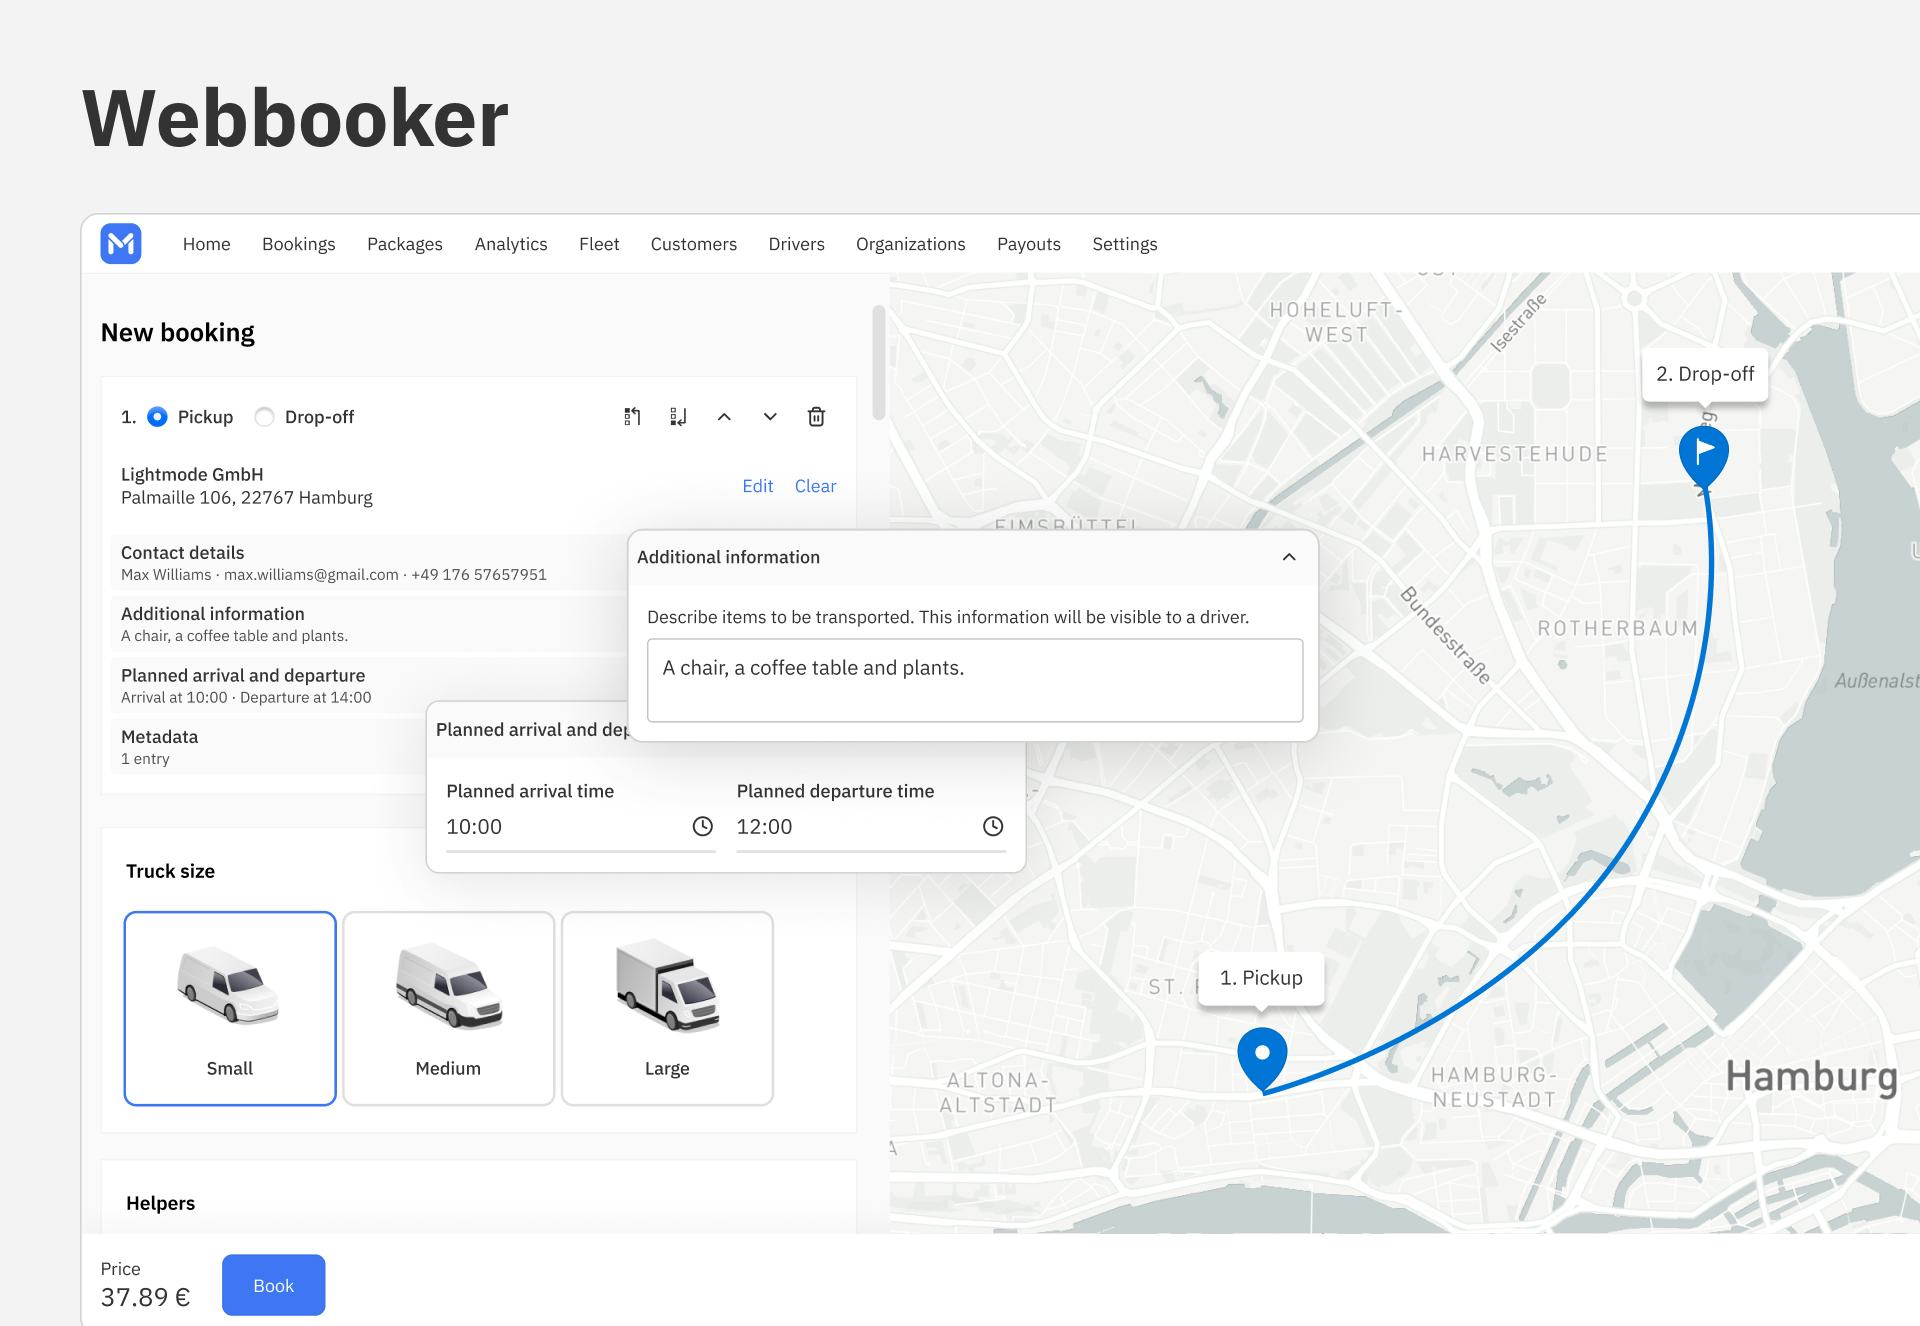 MotionTools Software - The Webbooker is a portal for customers to create and manage their bookings in a self-serving way.